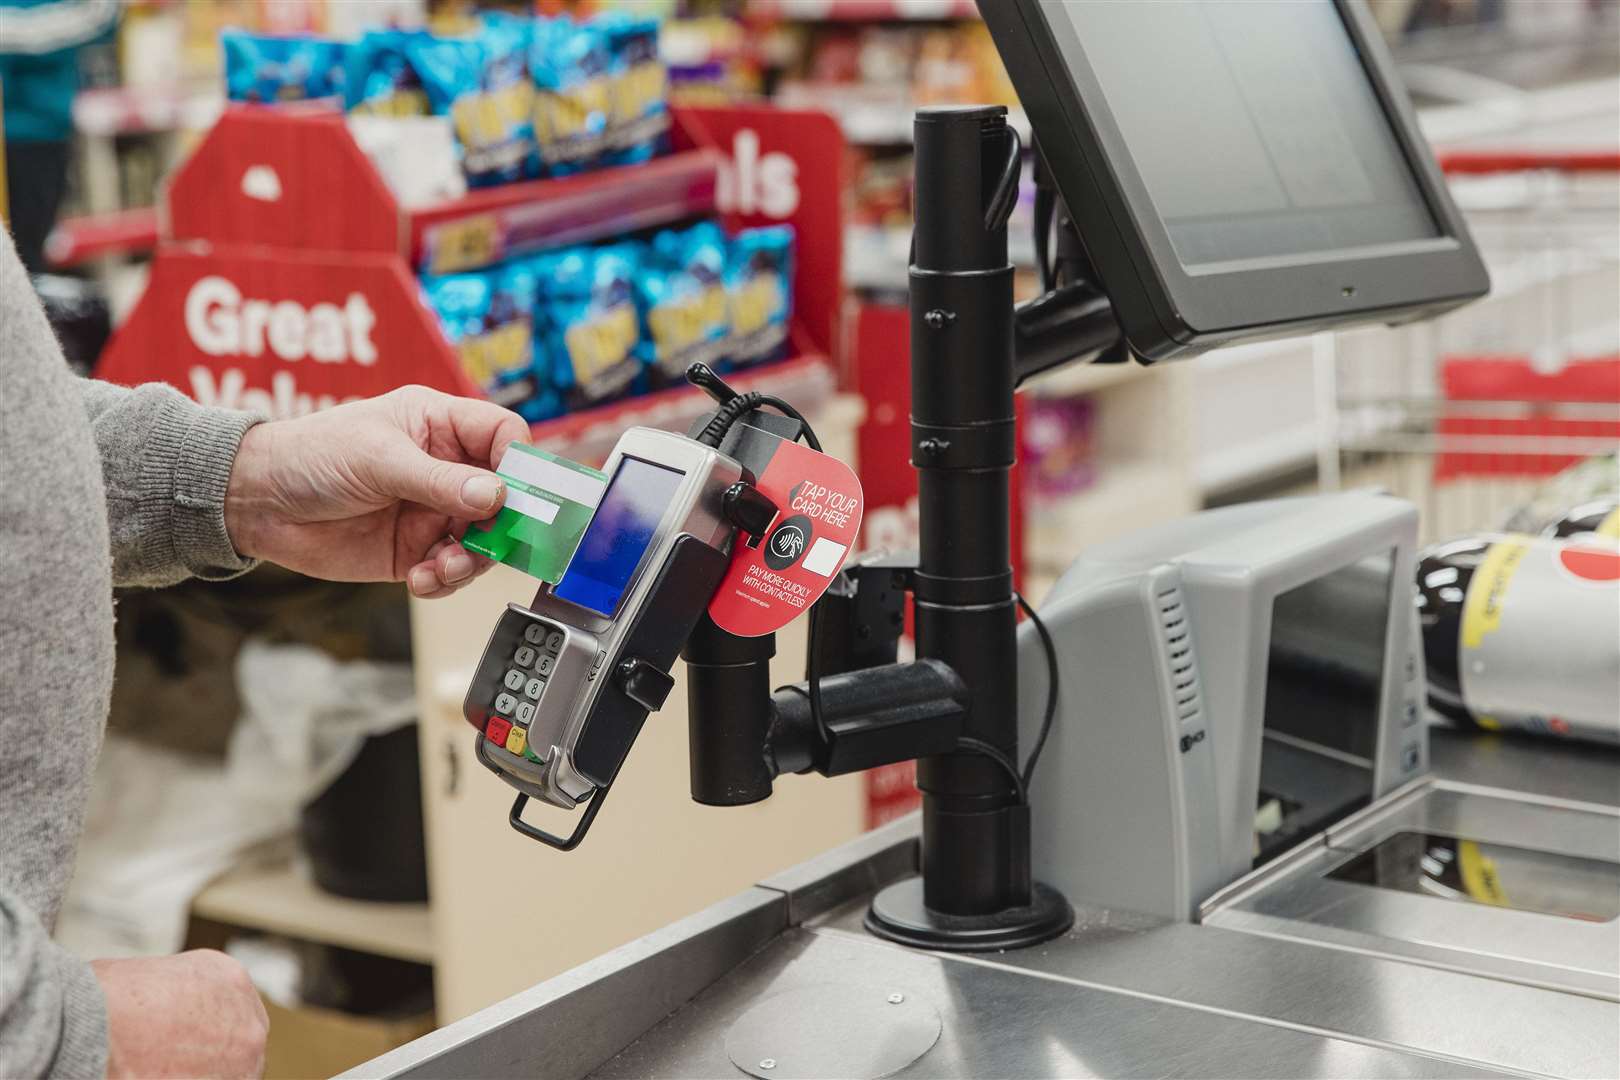 Tesco says shoppers can take the products back for a full refund. Image: Stock photo.